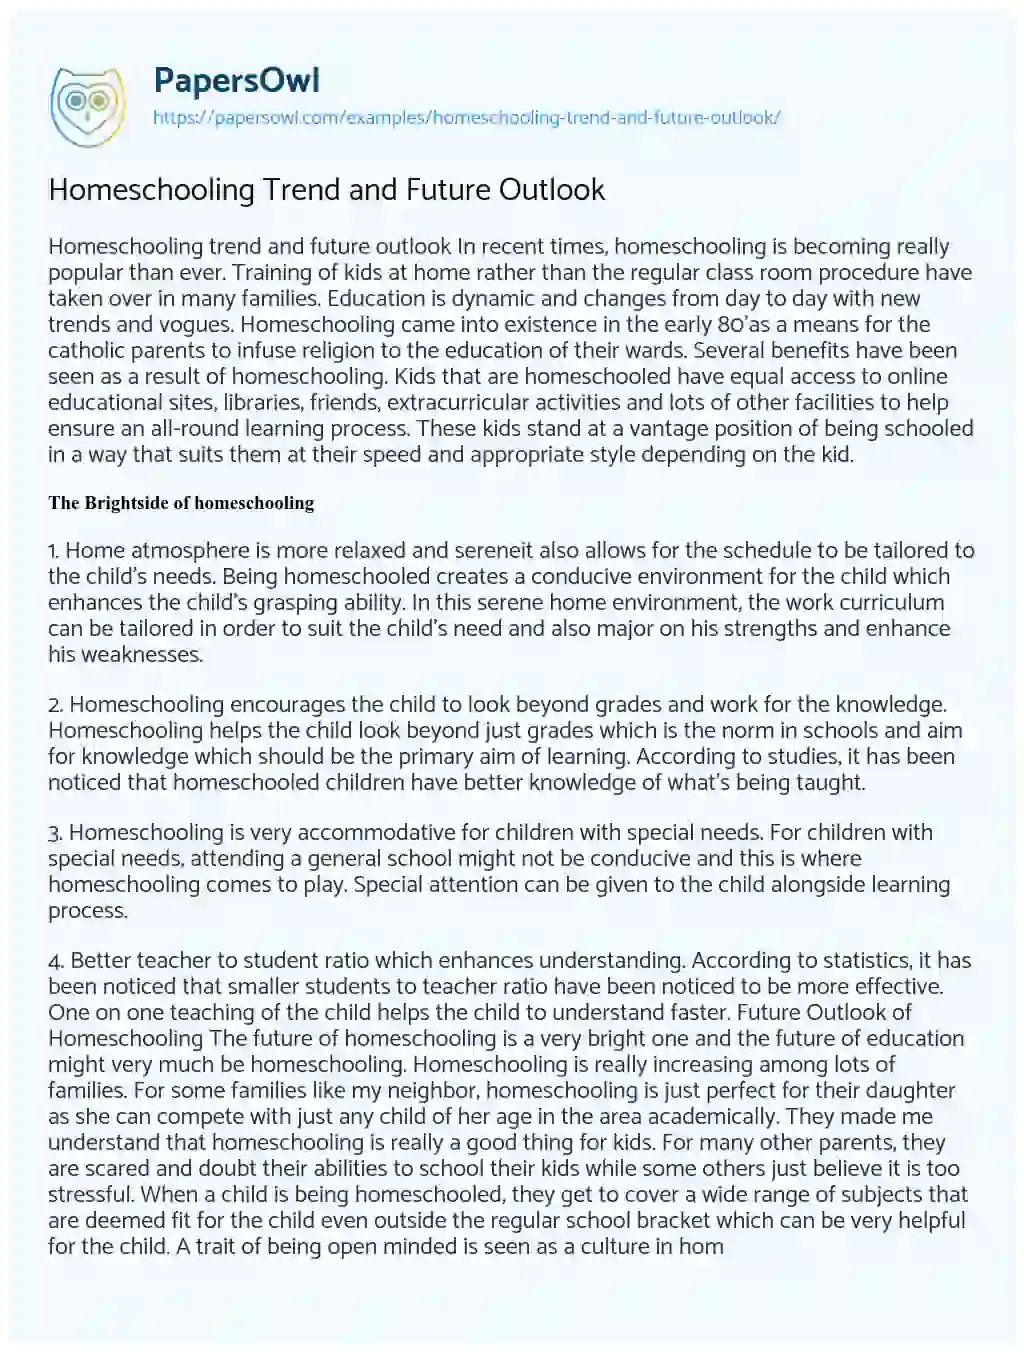 Homeschooling Trend and Future Outlook essay